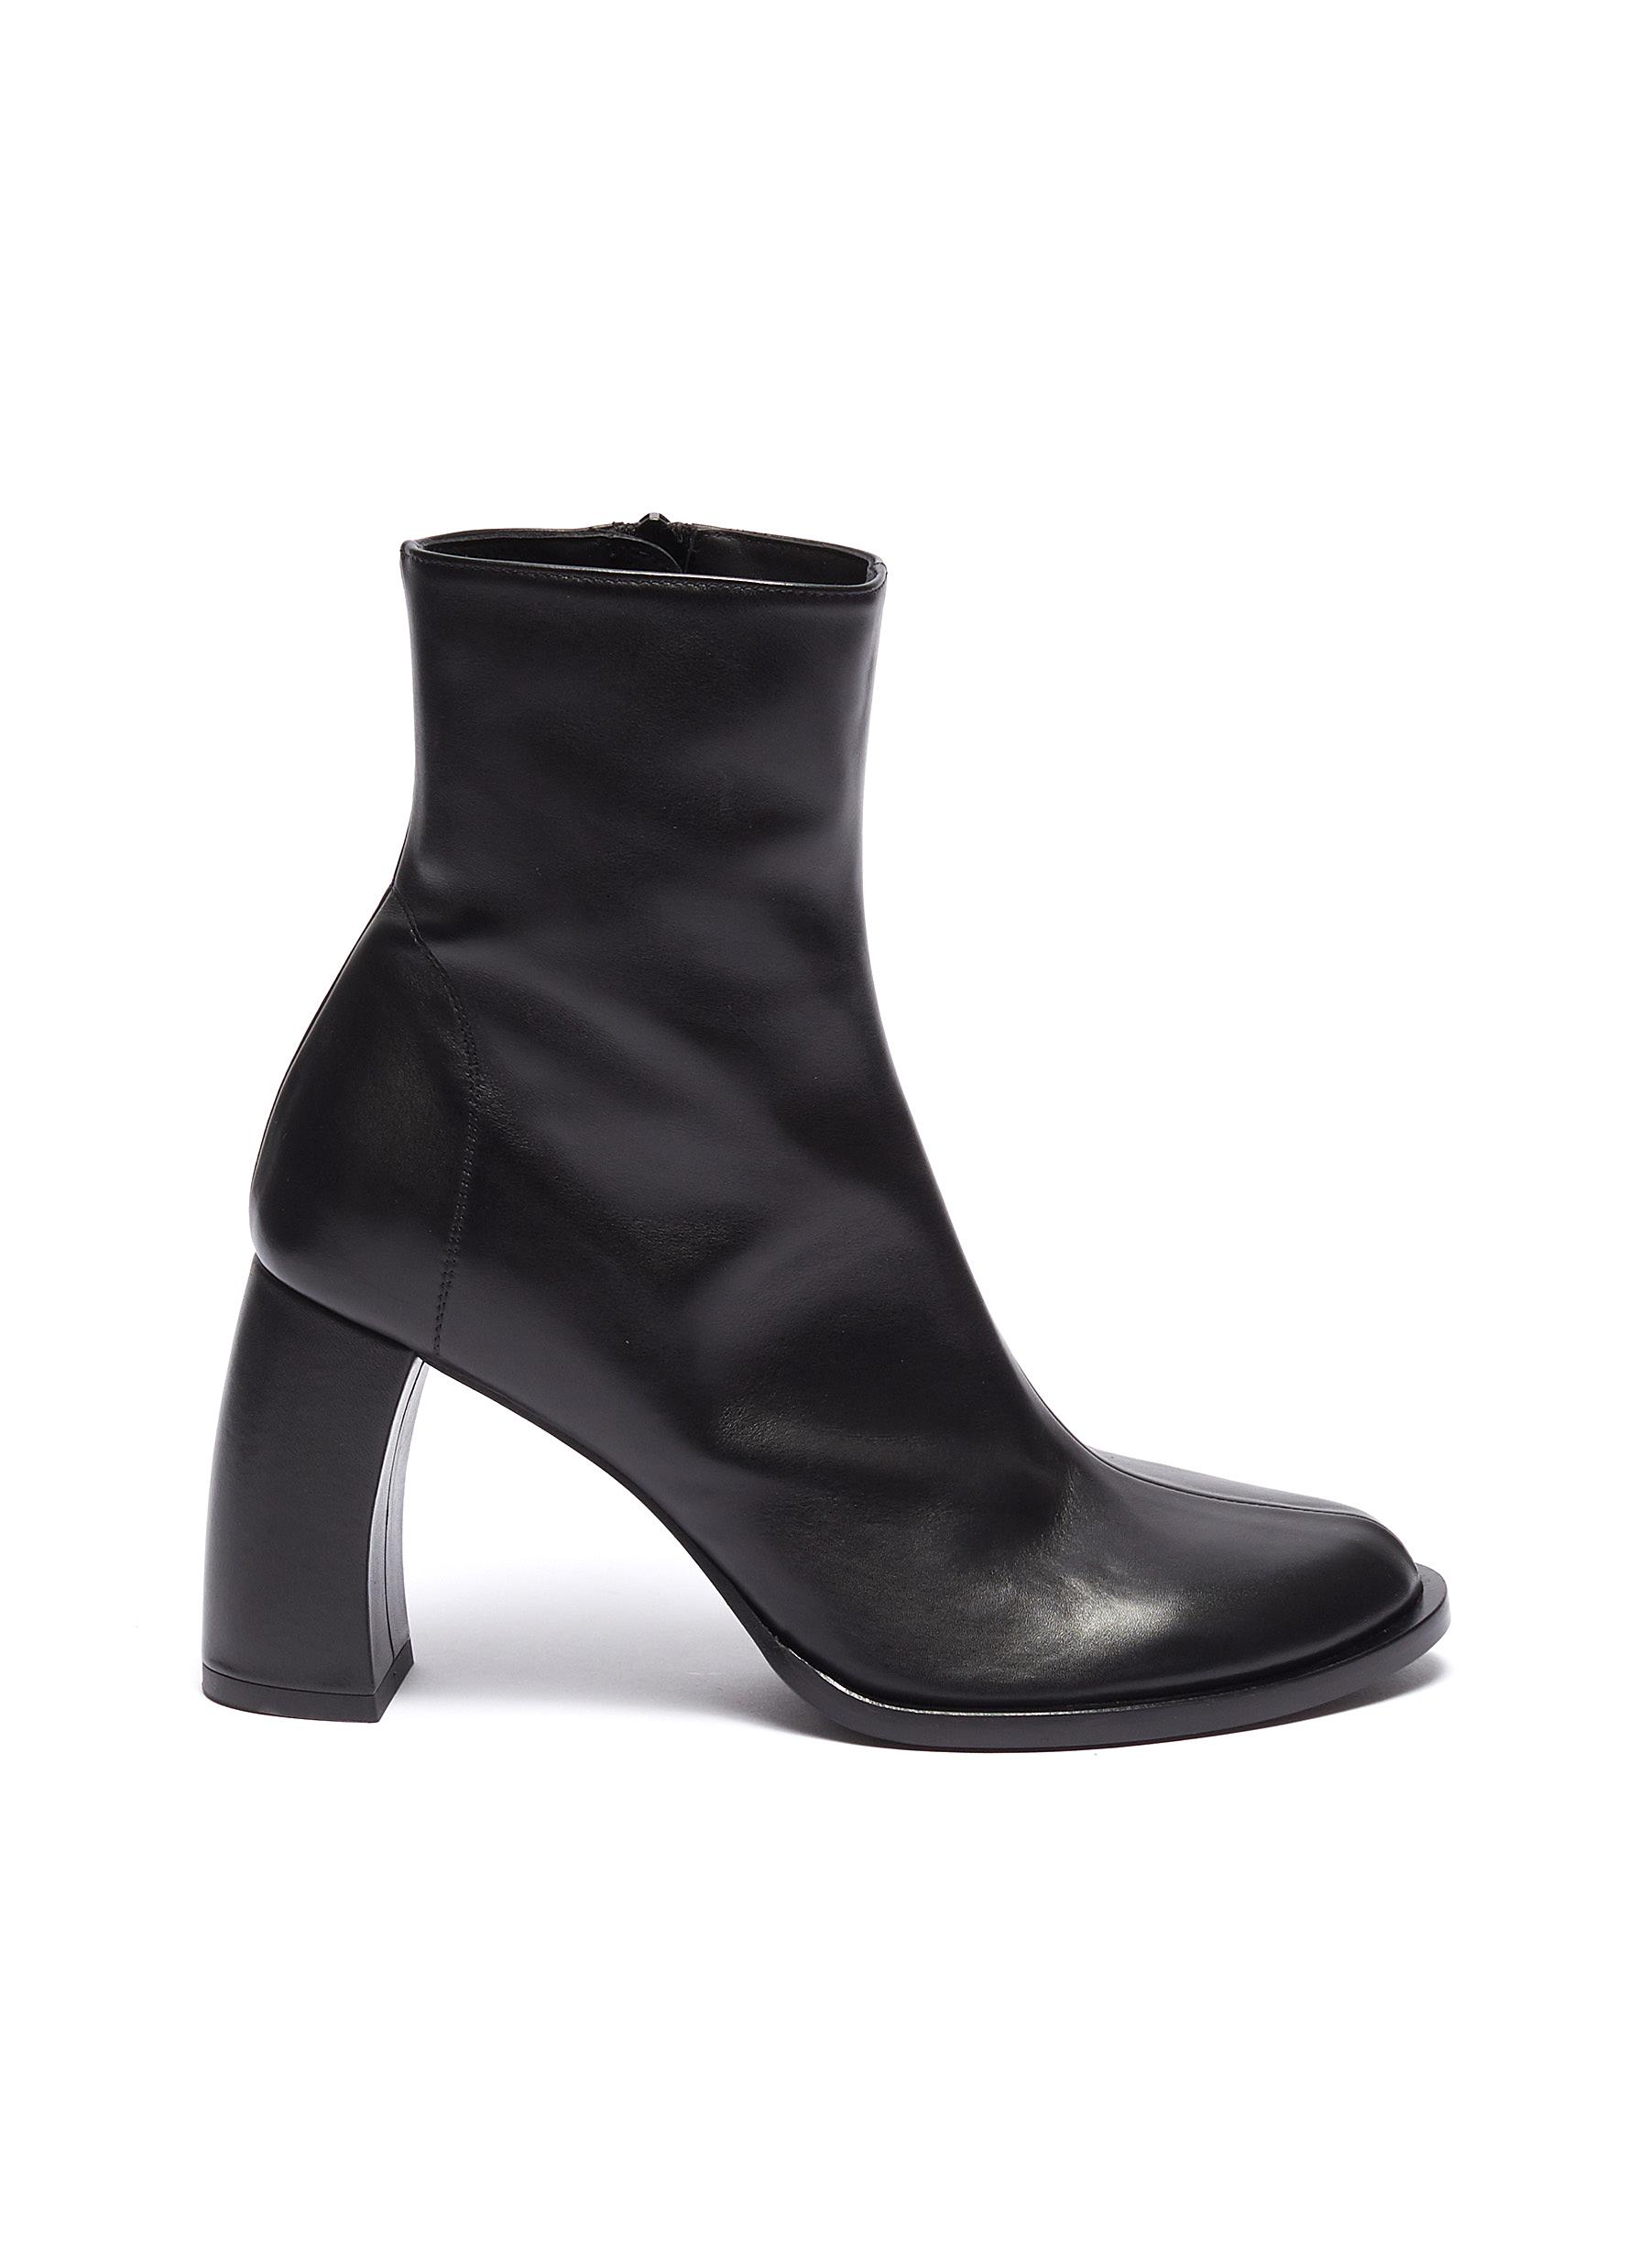 Ann Demeulemeester Boots Curved heel leather ankle boots